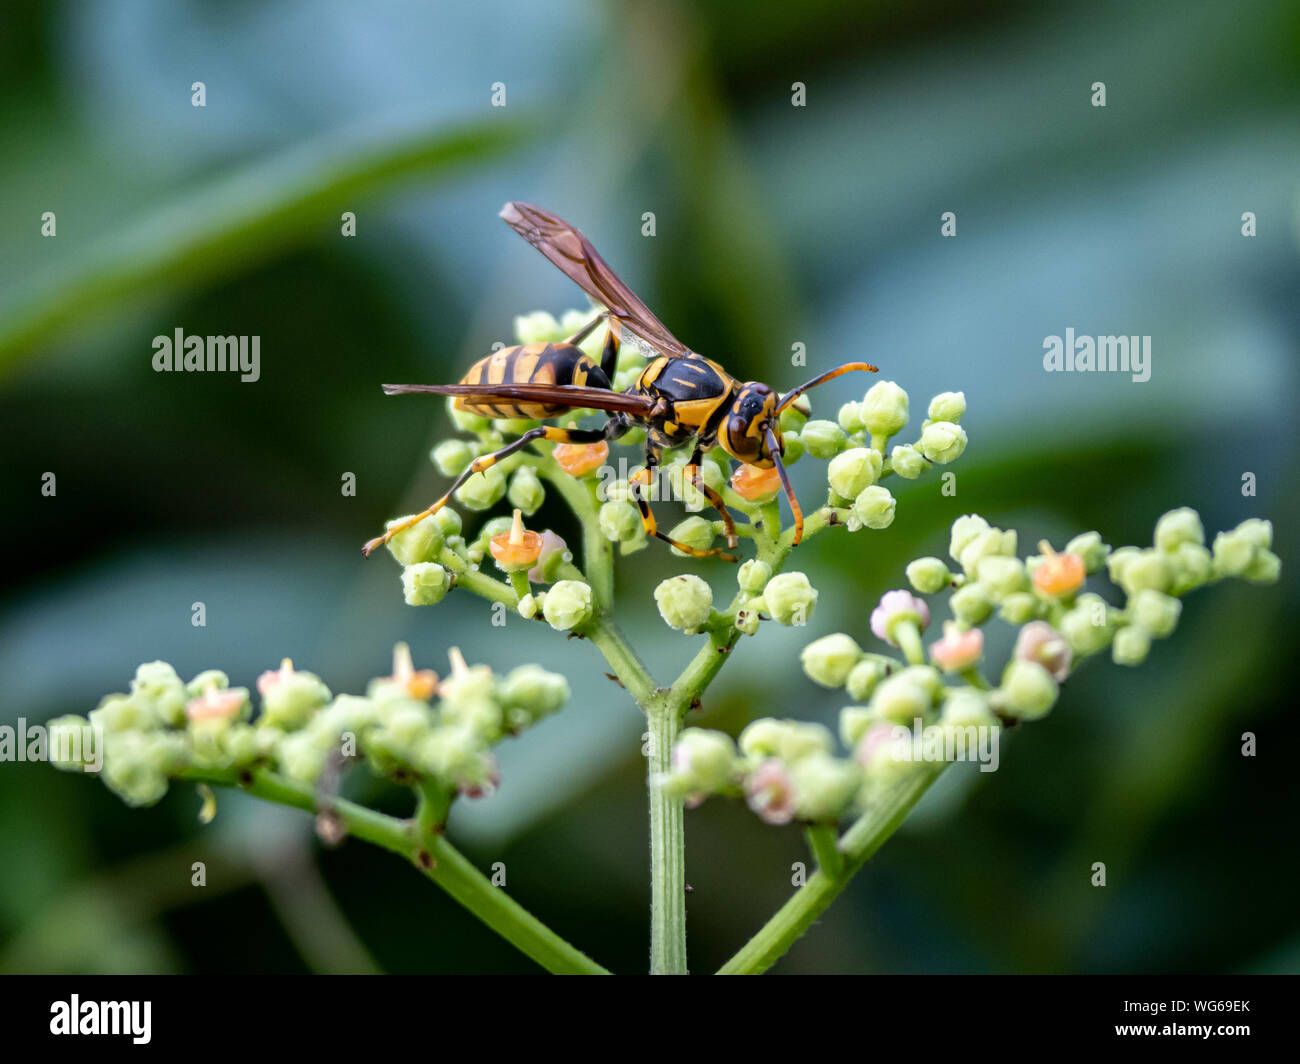 A Rothney's paper wasp, polistes rothneyi, on a cluster of small bushkiller flowers in a park in Yokohama, Japan Stock Photo